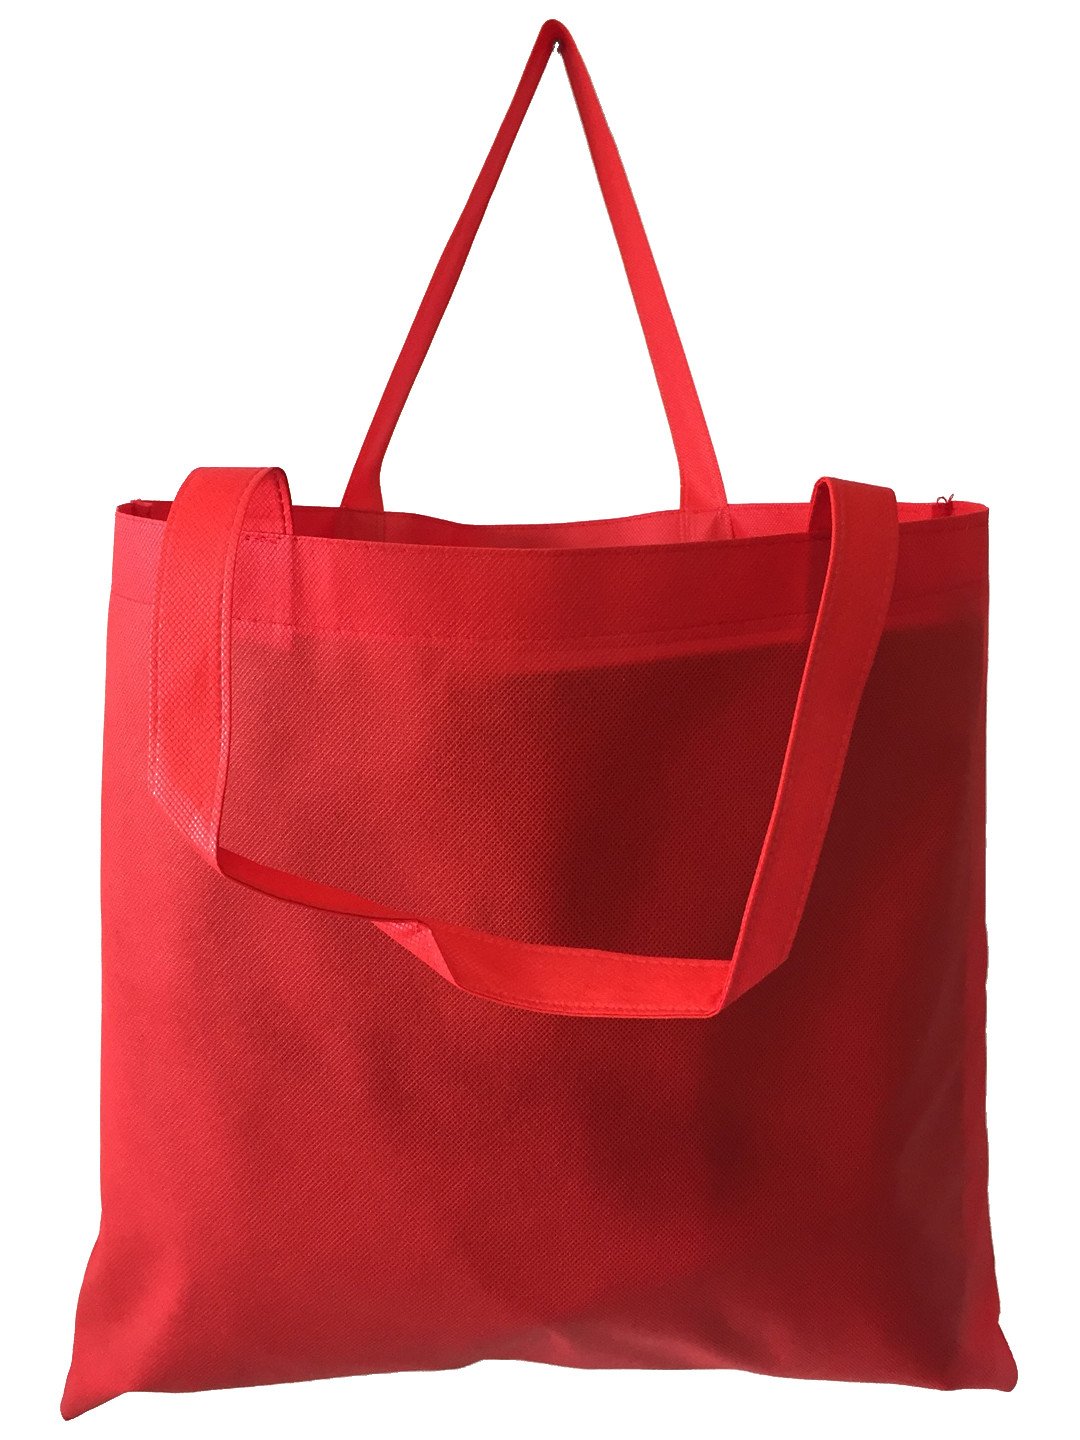 Reusable Grocery Large Tote Bags Red